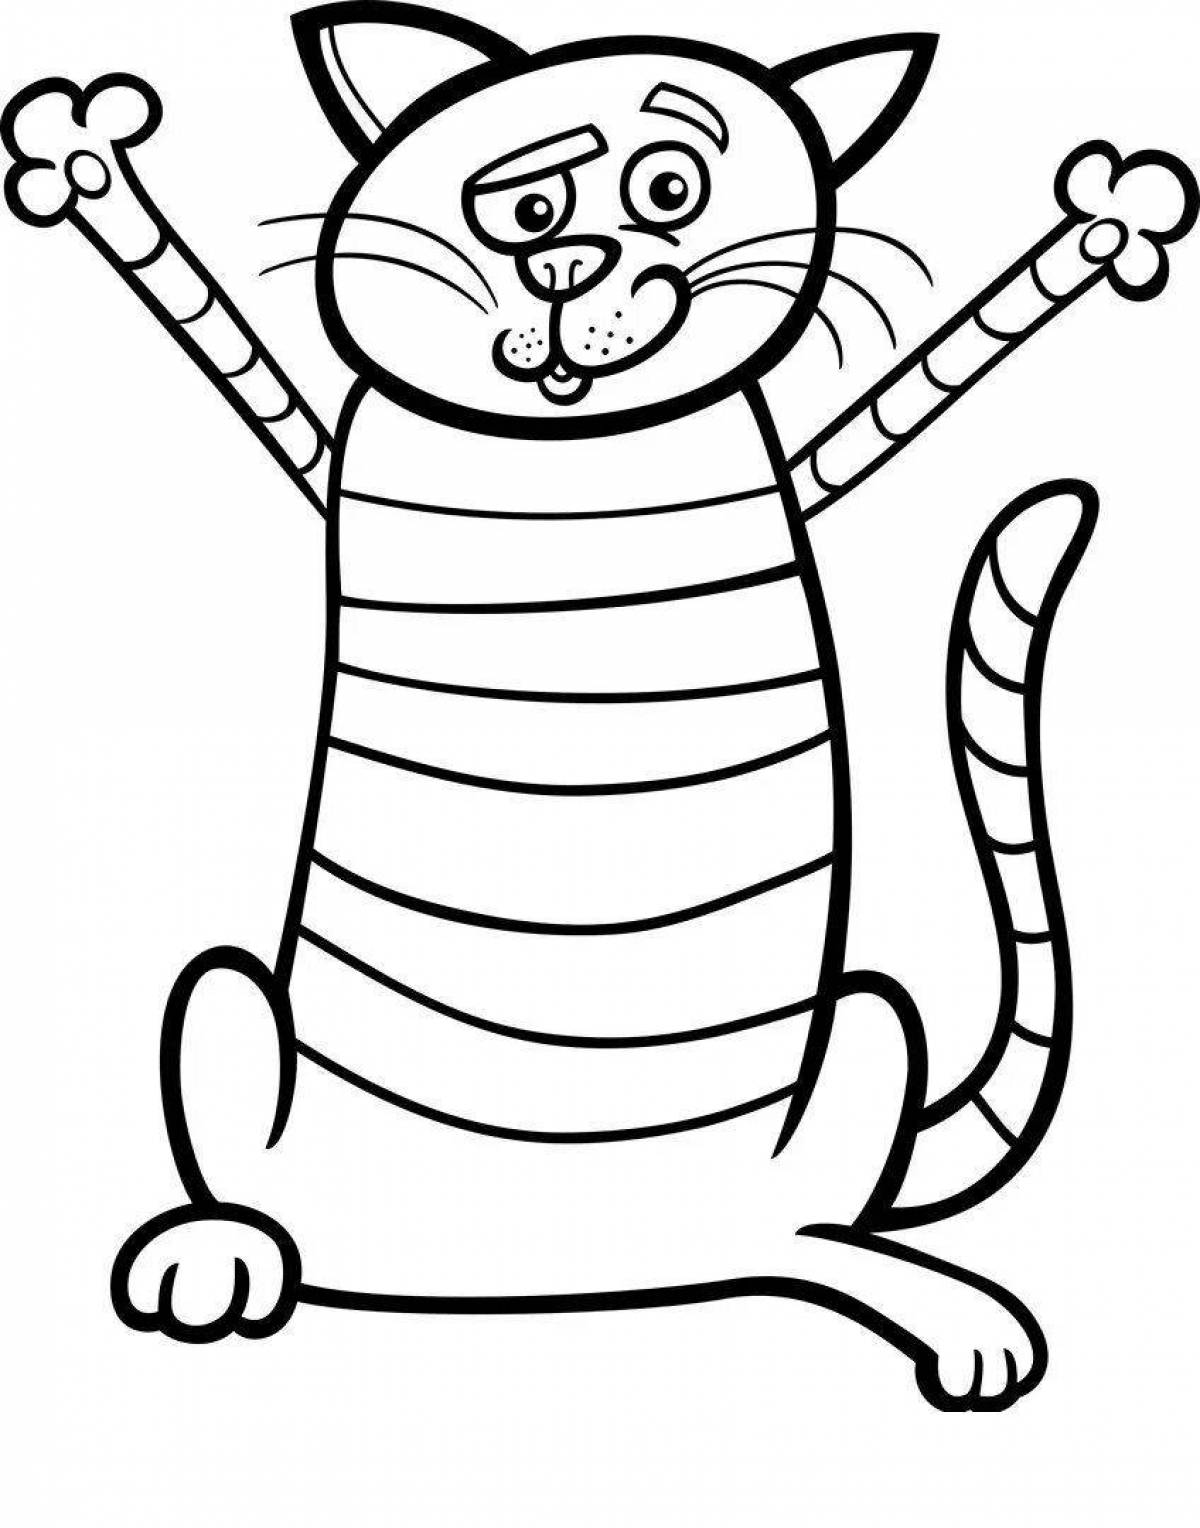 Whiskas cat coloring page